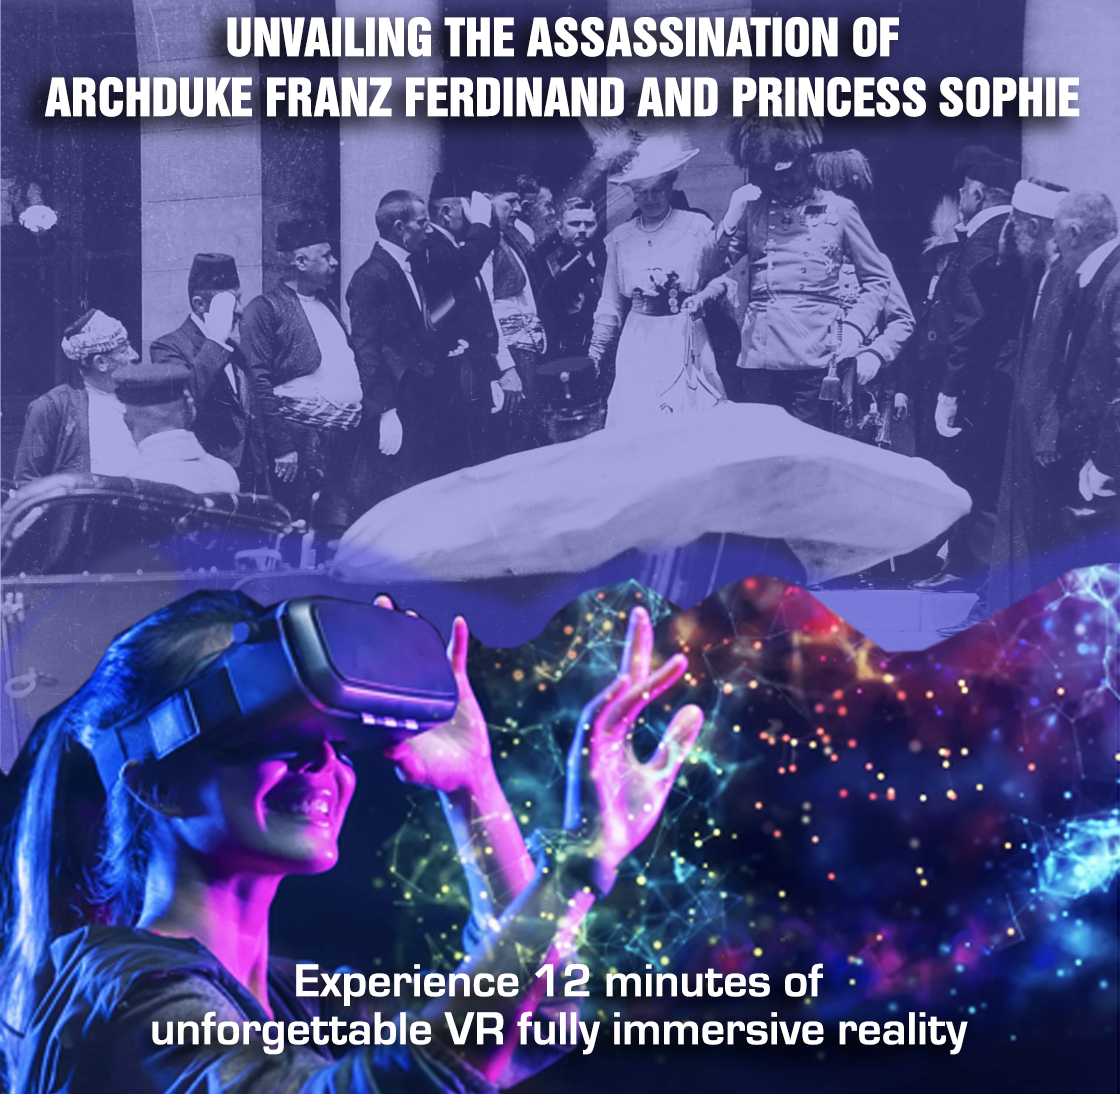 UNVAILING THE ASSASSINATION OF ARCHDUKE FRANZ FERDINAND AND SOPHIE - Experience unforgettable VR immersive reality